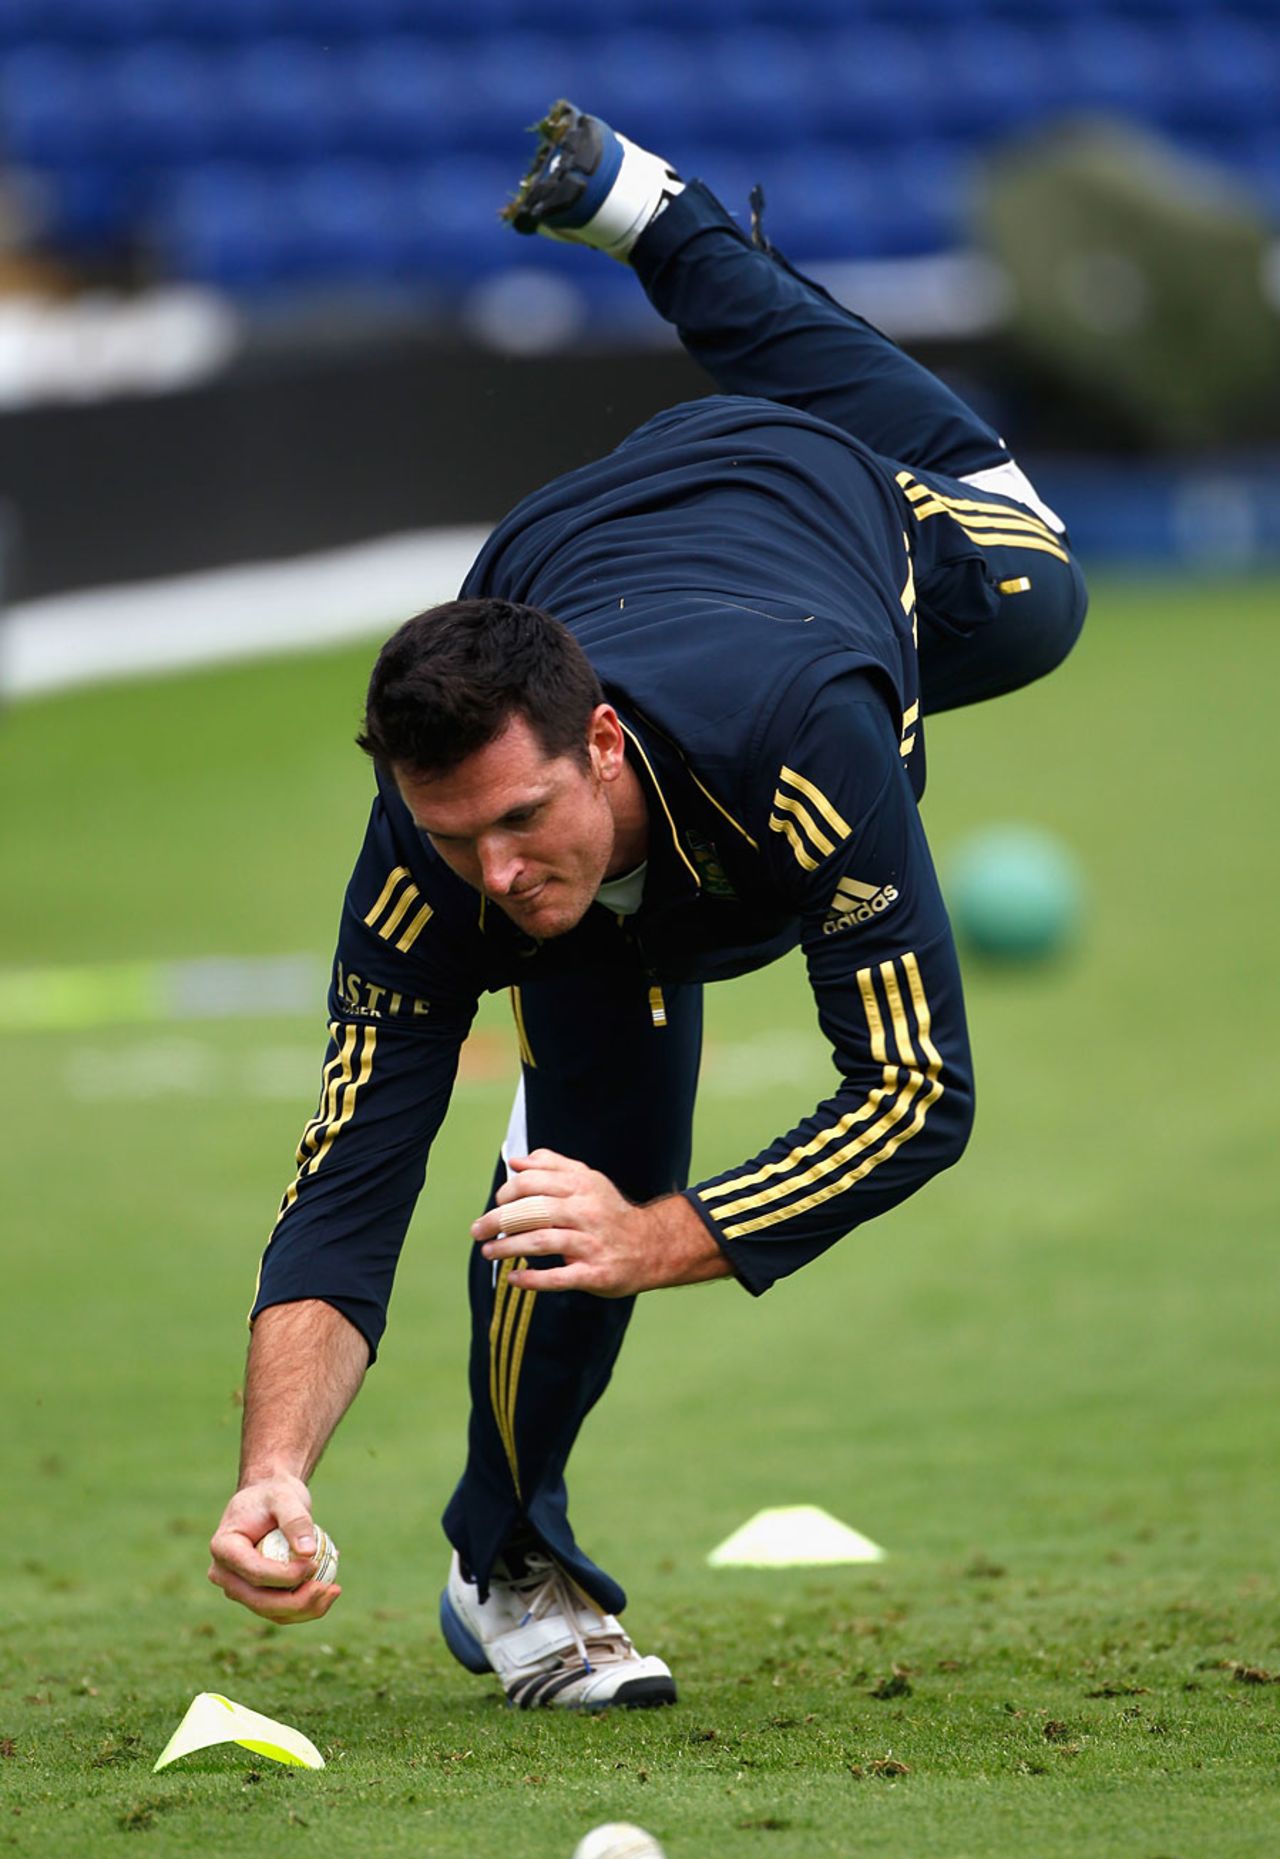 Graeme Smith was back in training after the Test success, Cardiff, August 23, 2012